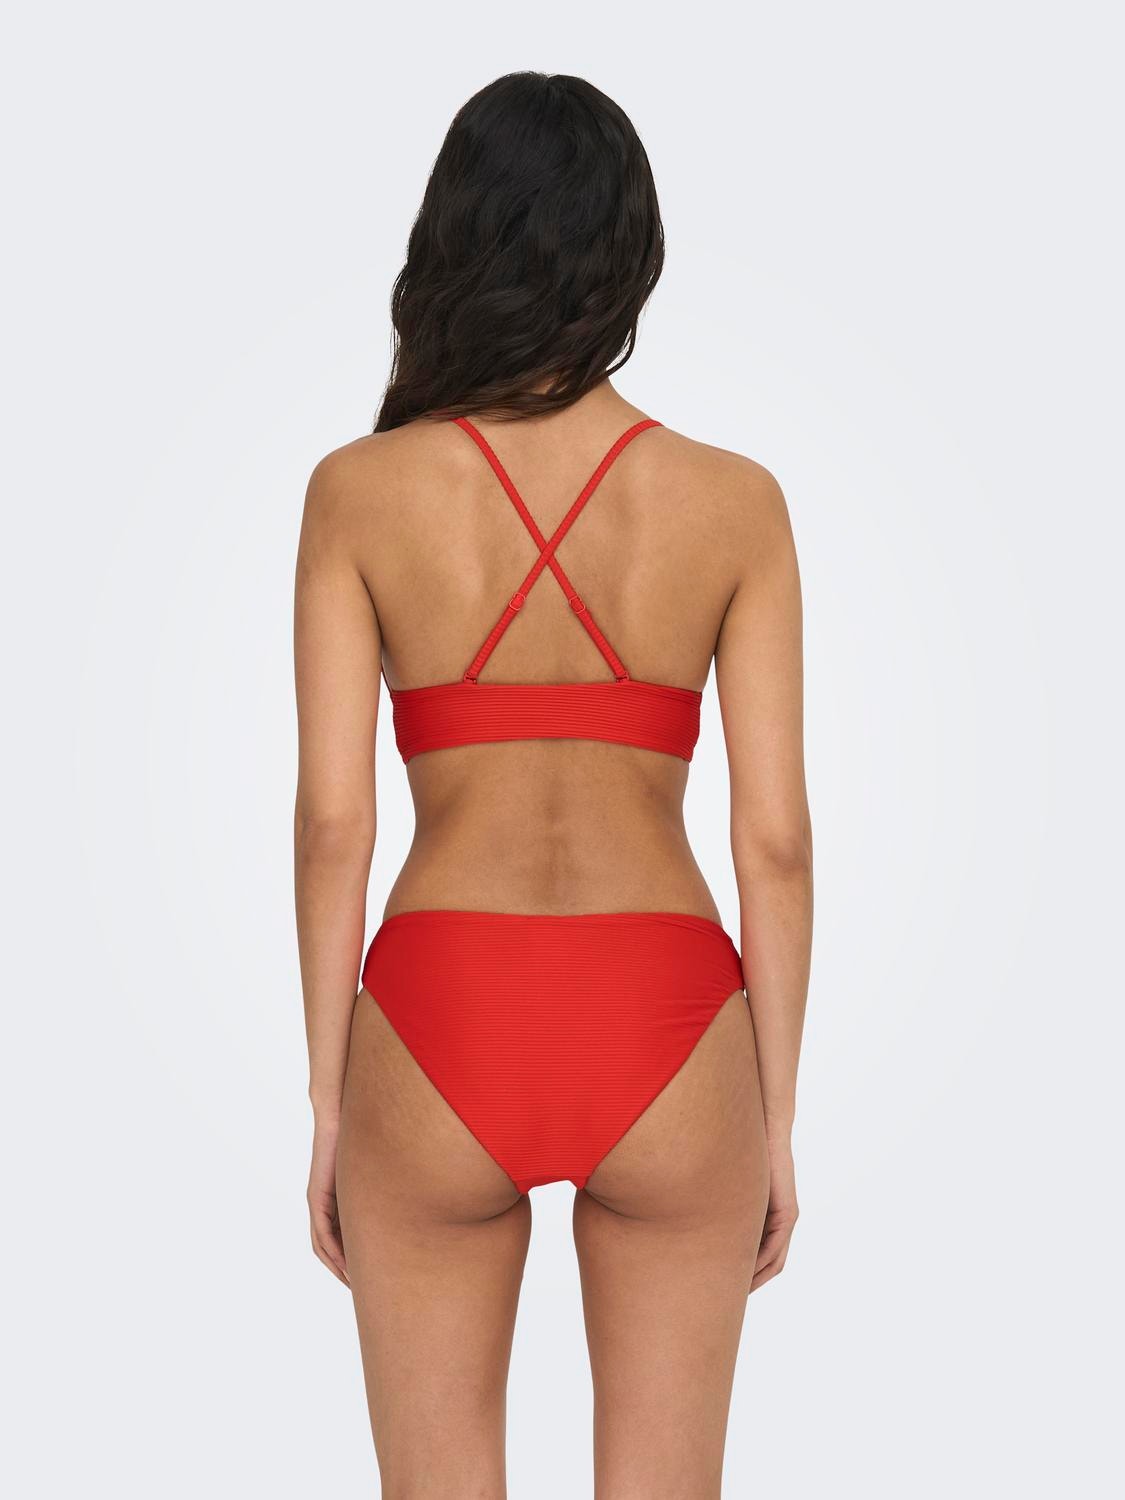 ONLY Solid Colored Bikini Set -Fiery Red - 15304100